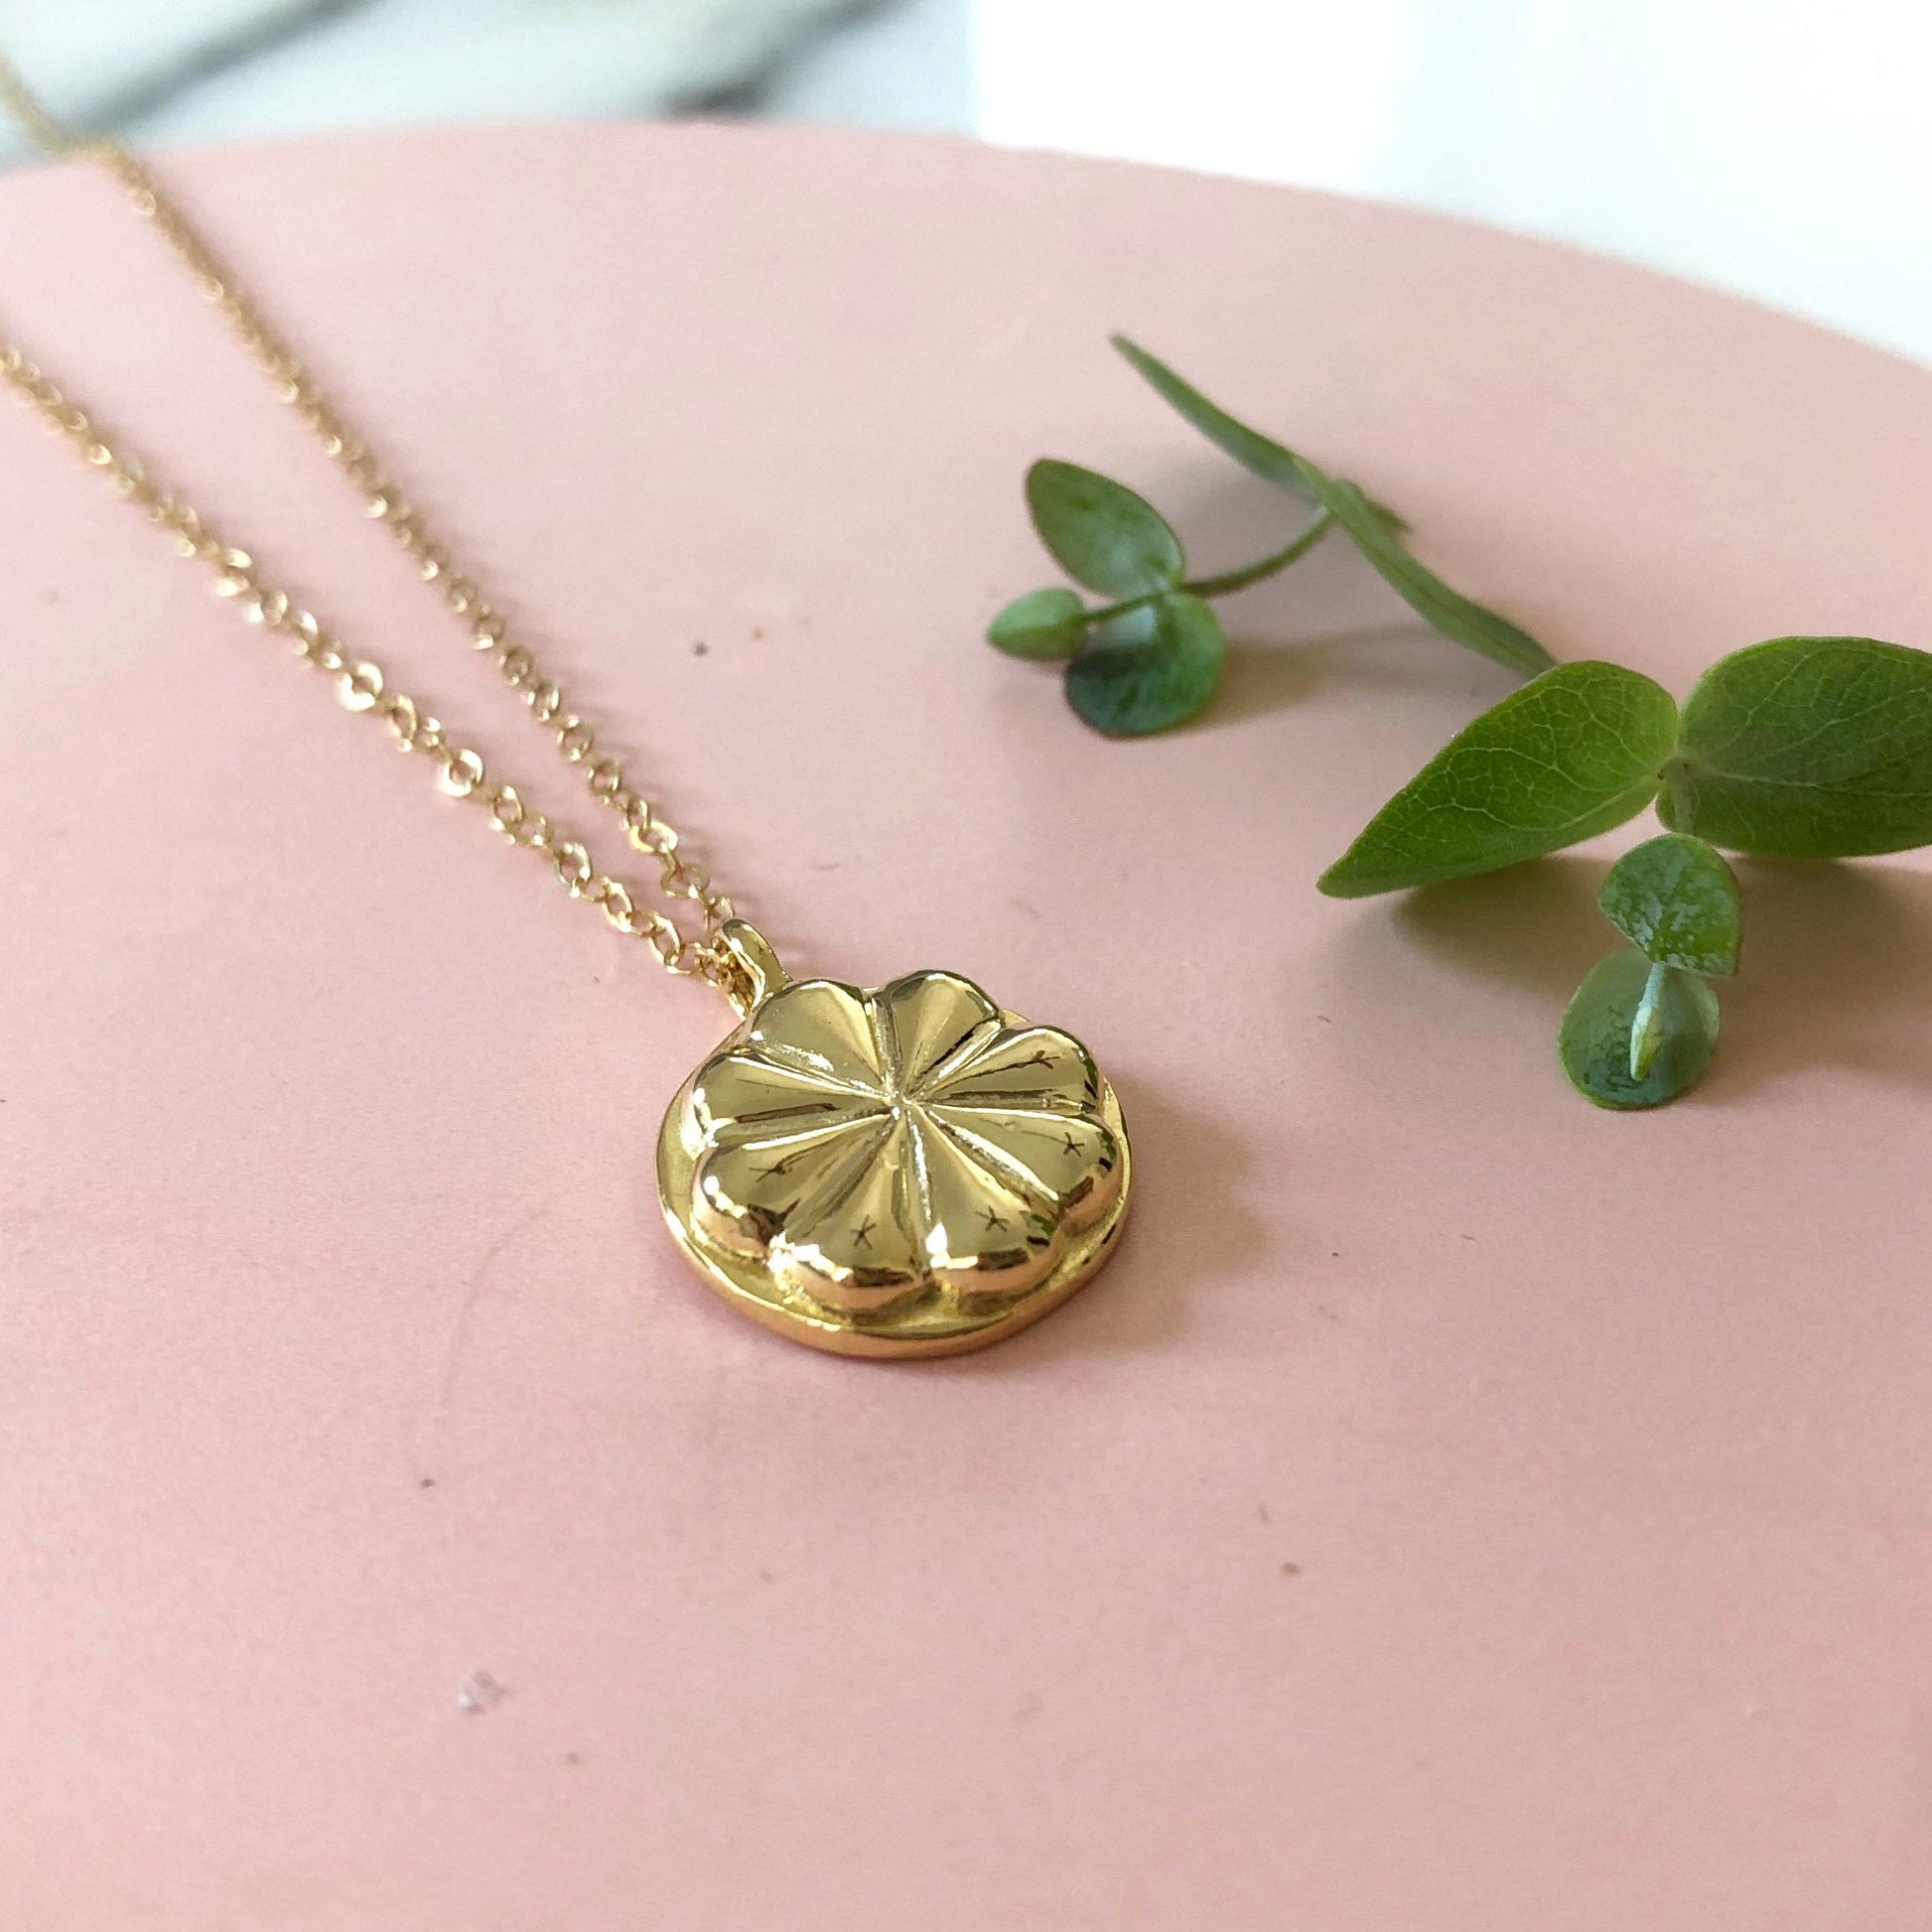 close up of a gold circular medallion necklace on a gold chain on a pink background with greenery